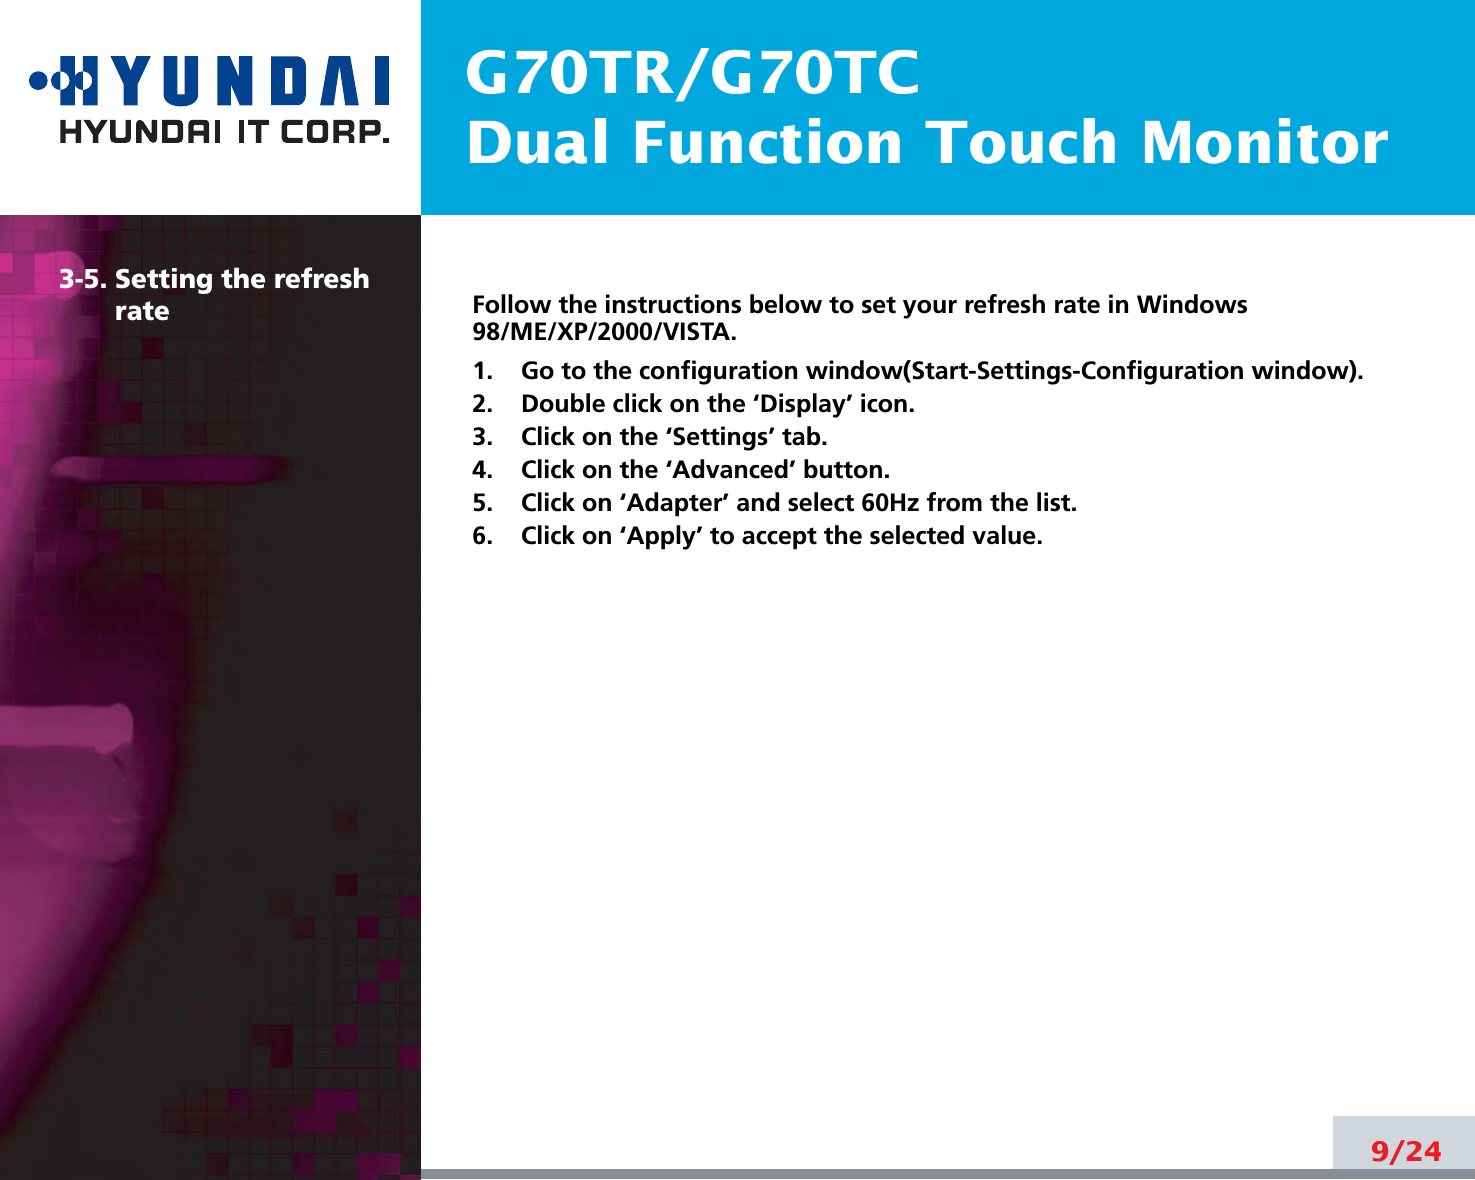 G70TR/G70TCDual Function Touch Monitor9/243-5. Setting the refreshrateFollow the instructions below to set your refresh rate in Windows98/ME/XP/2000/VISTA.1.    Go to the configuration window(Start-Settings-Configuration window).2.    Double click on the ‘Display’ icon.3.    Click on the ‘Settings’ tab.4.    Click on the ‘Advanced’ button.5.    Click on ‘Adapter’ and select 60Hz from the list.6.    Click on ‘Apply’ to accept the selected value.